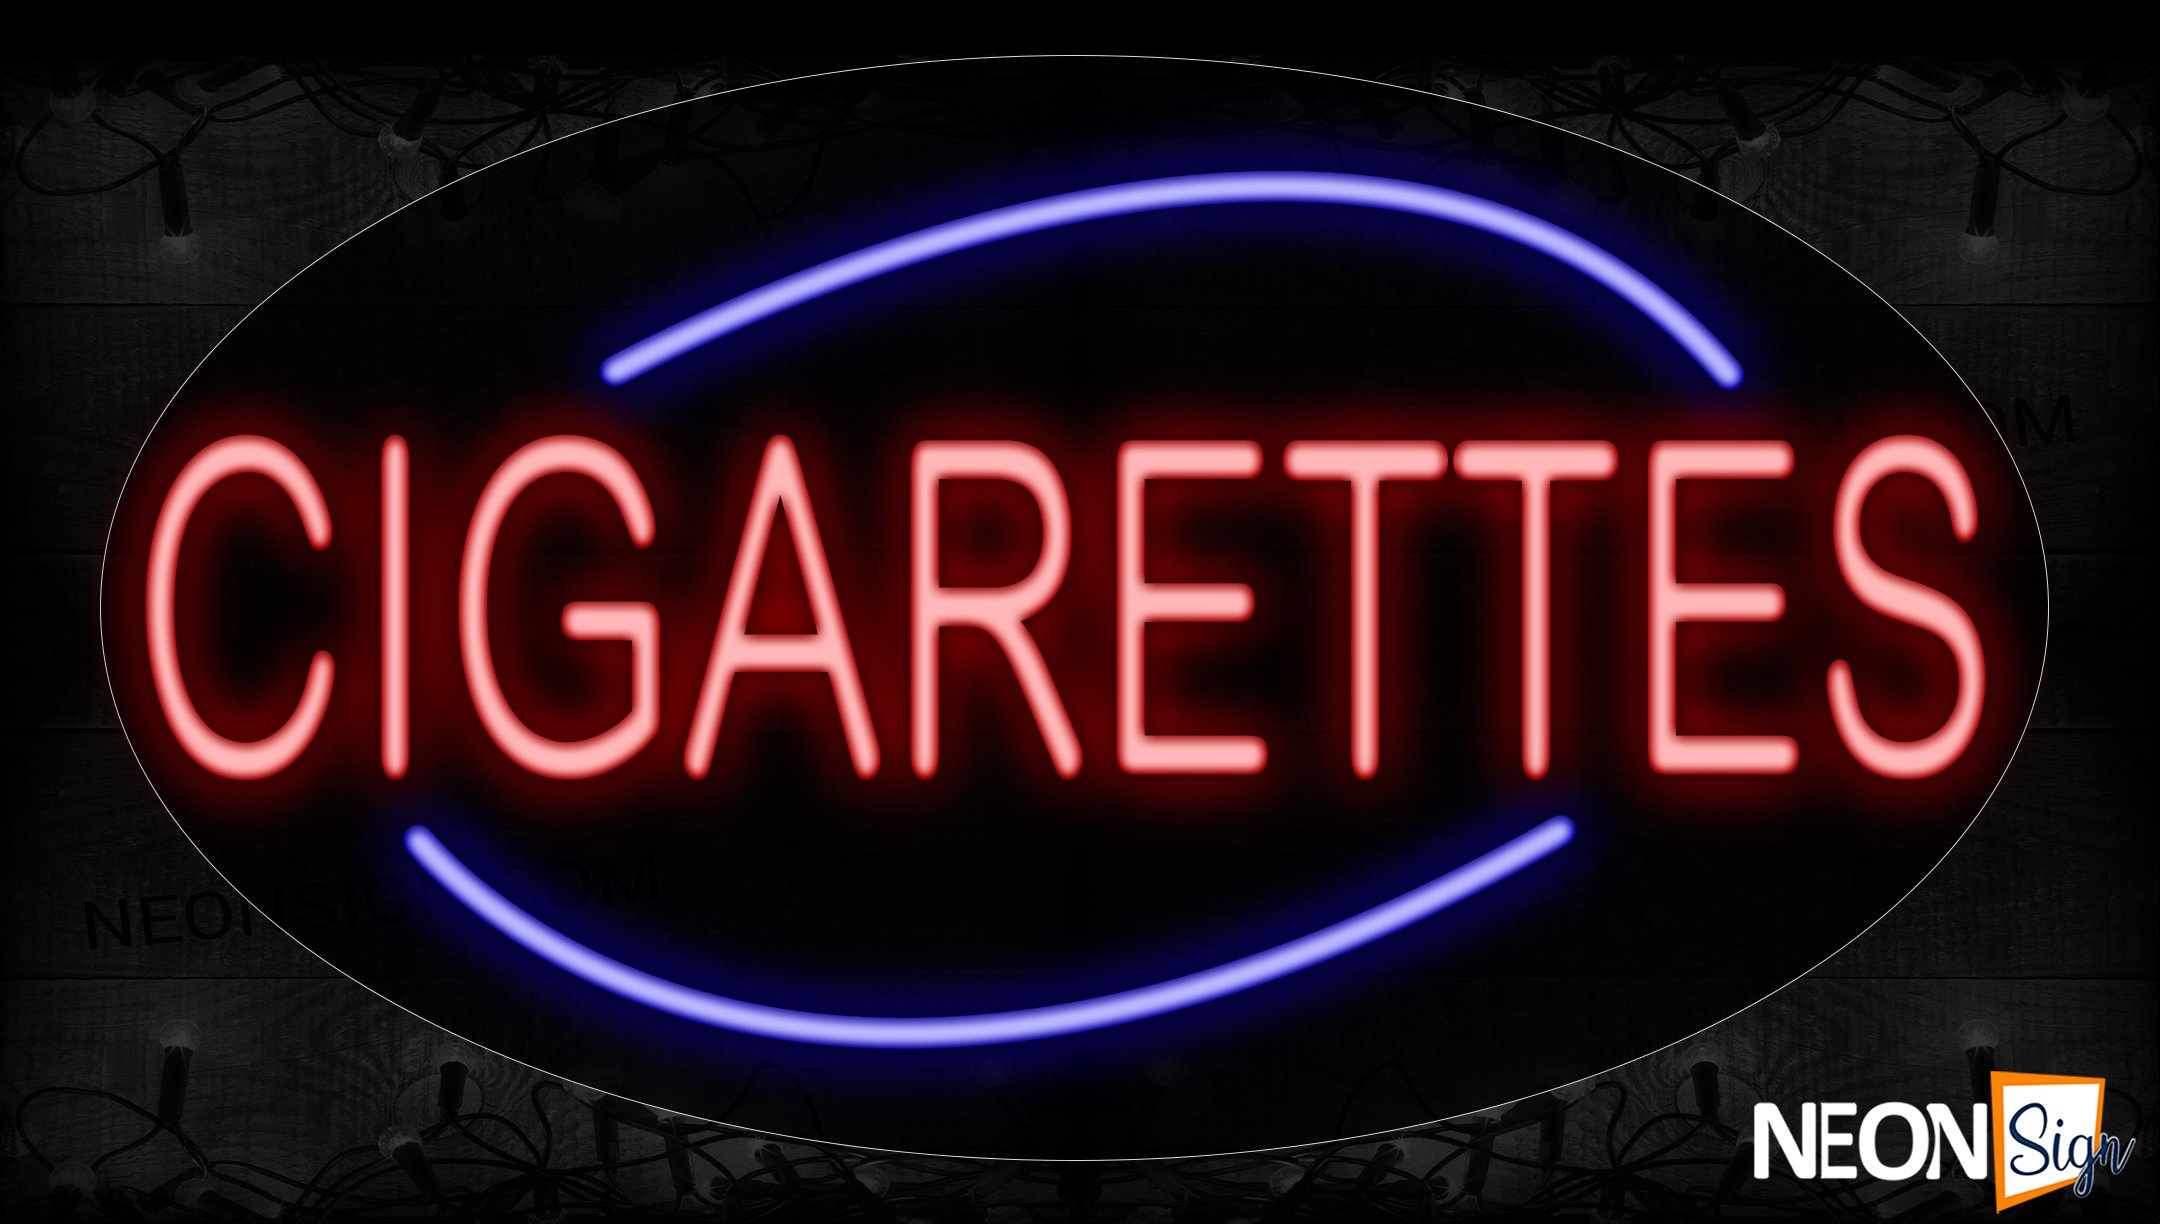 Image of 14335 Cigarettes In Red With Blue Arc Border Neon Signs_17x30 Contoured Black Backing